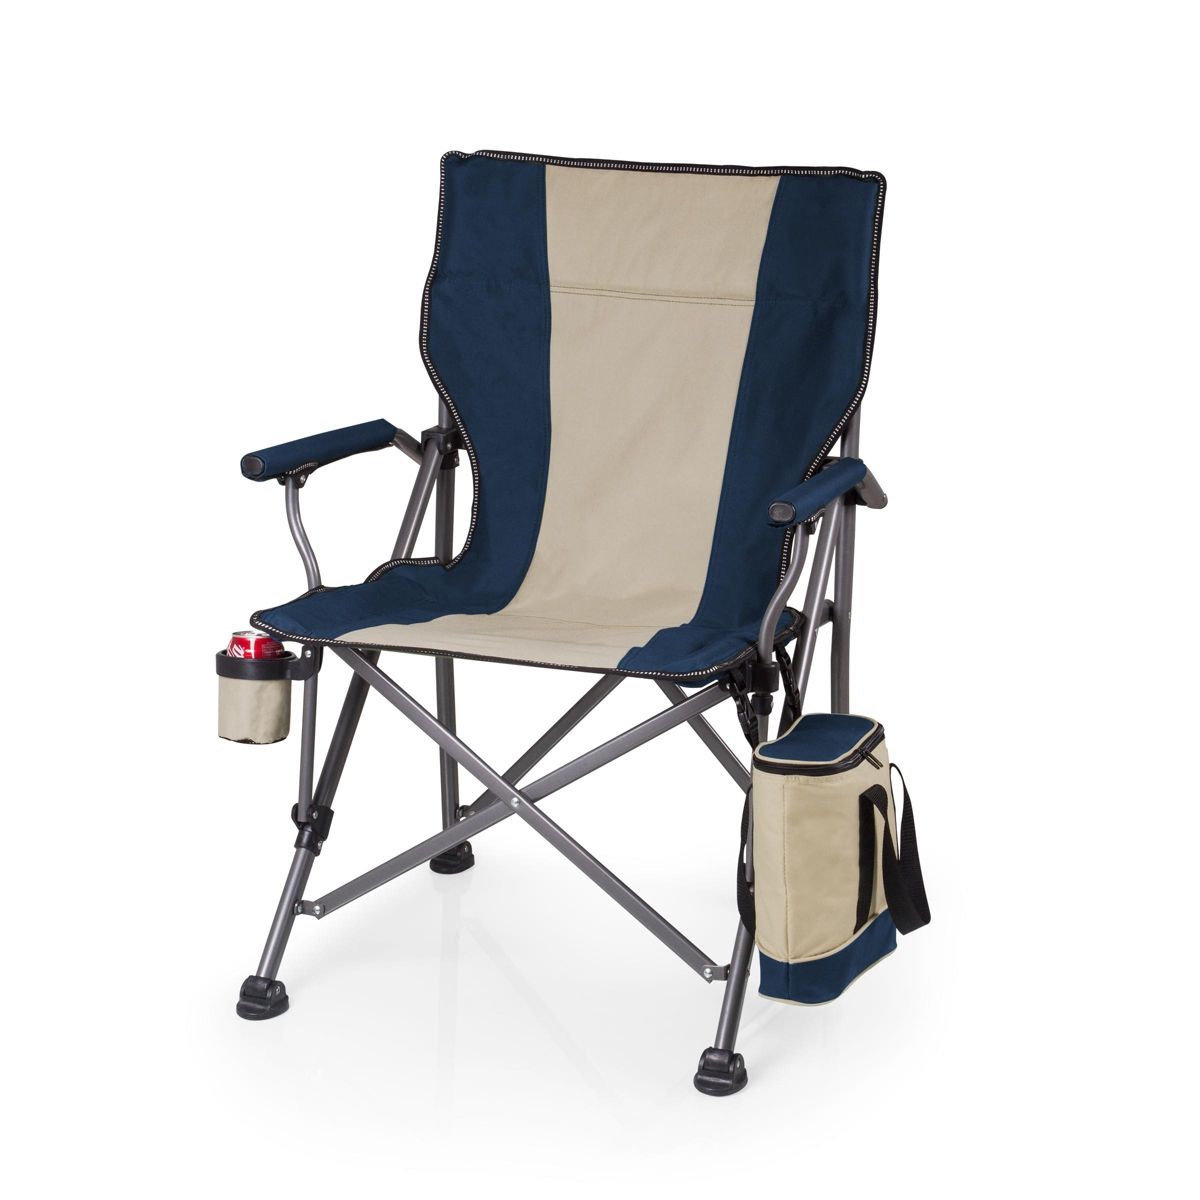 Oniva by Picnic Time Navy Outlander Folding Camp Chair with Cooler | Macys (US)